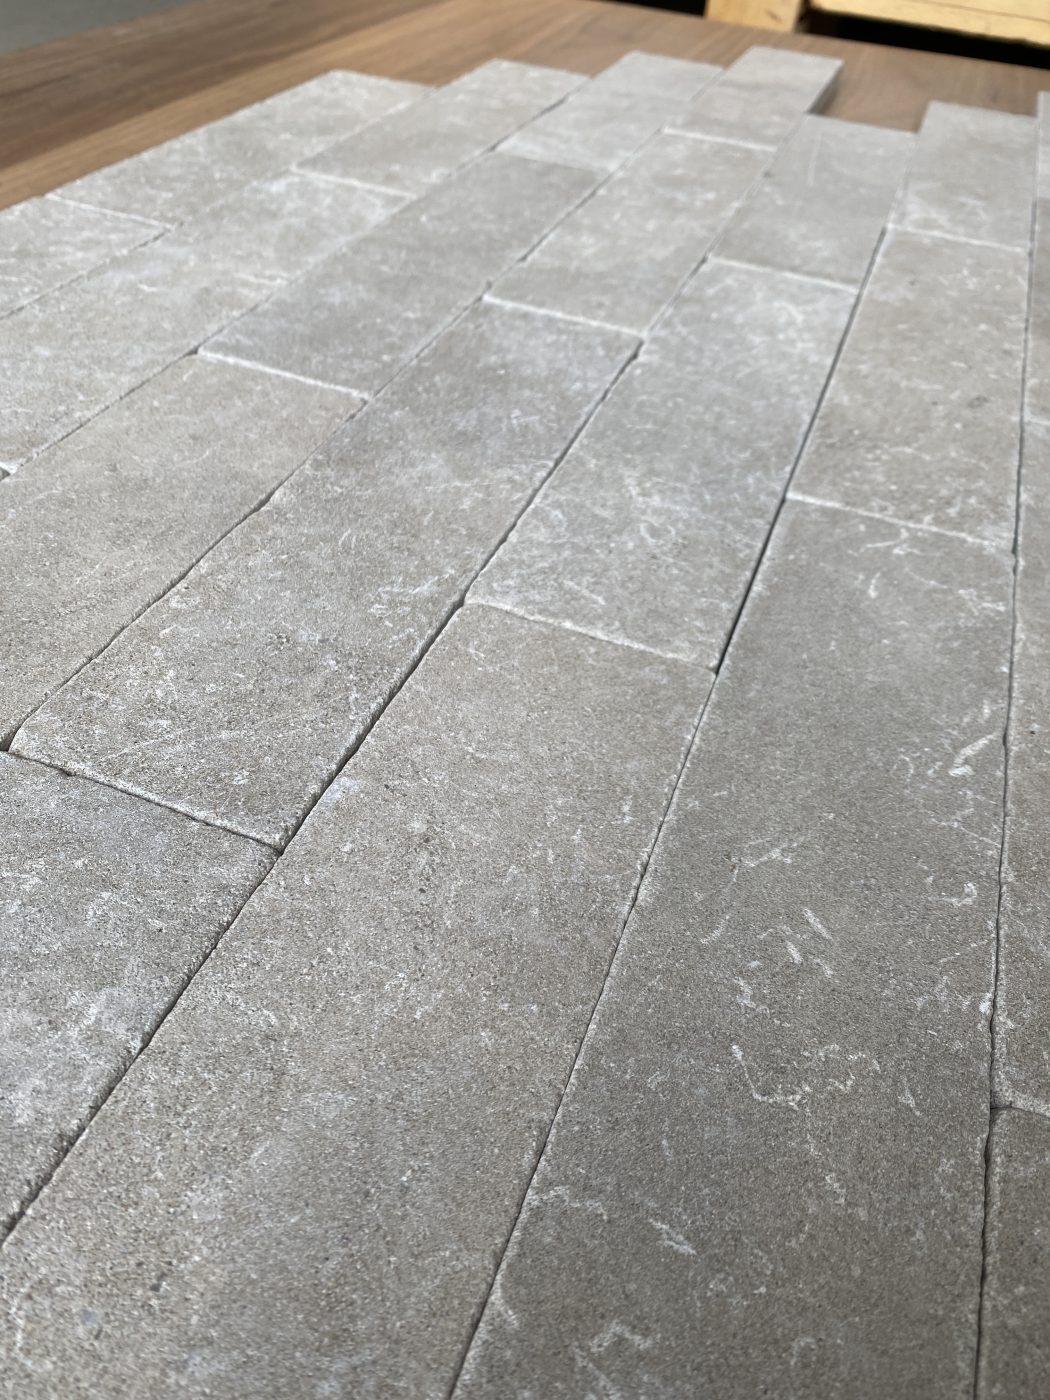 MADDISON-BRUSHED-TUMBLED-LIMESTONE-BATTONS_RMS-TRADERS_NATURAL-STONE-PAVER-SUPPLIER-MELBOURNE-17-1-scaled